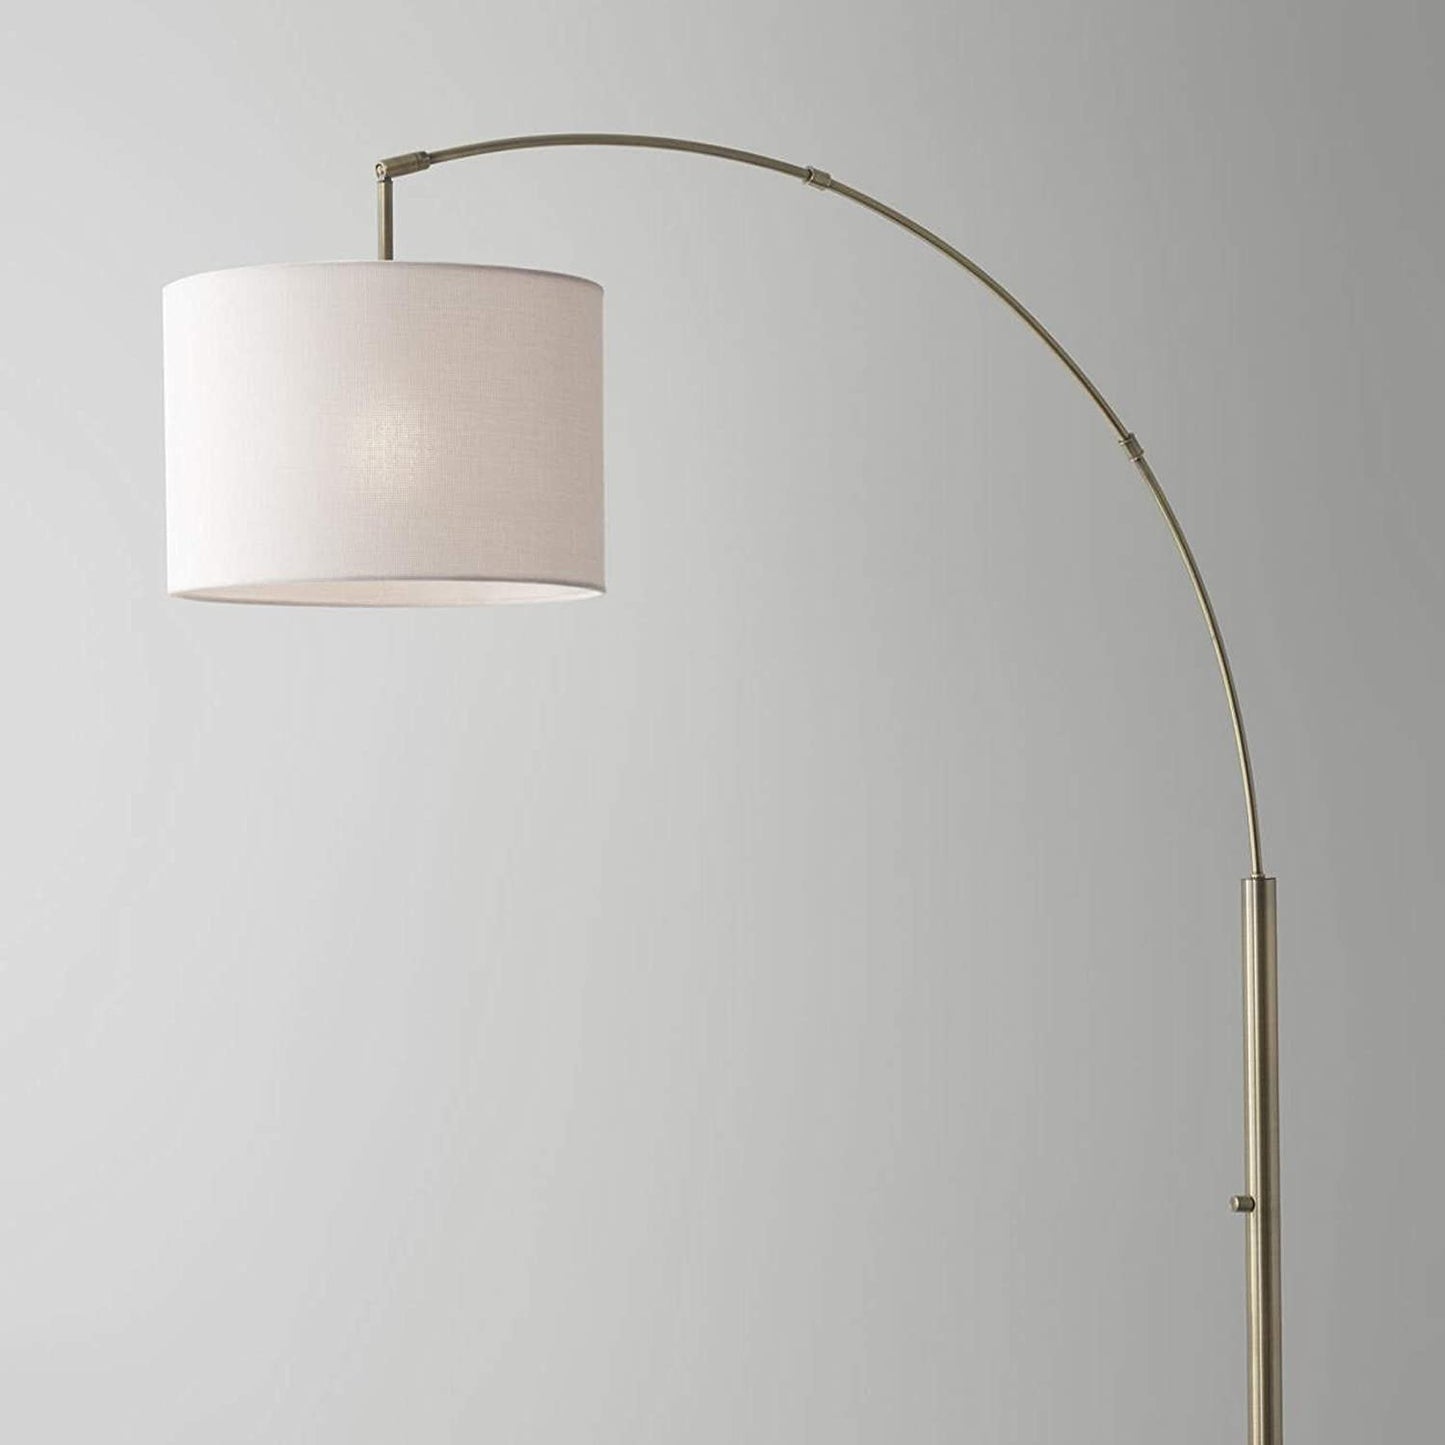 74" Brass Arc Floor Lamp With Off White Solid Color Drum Shade